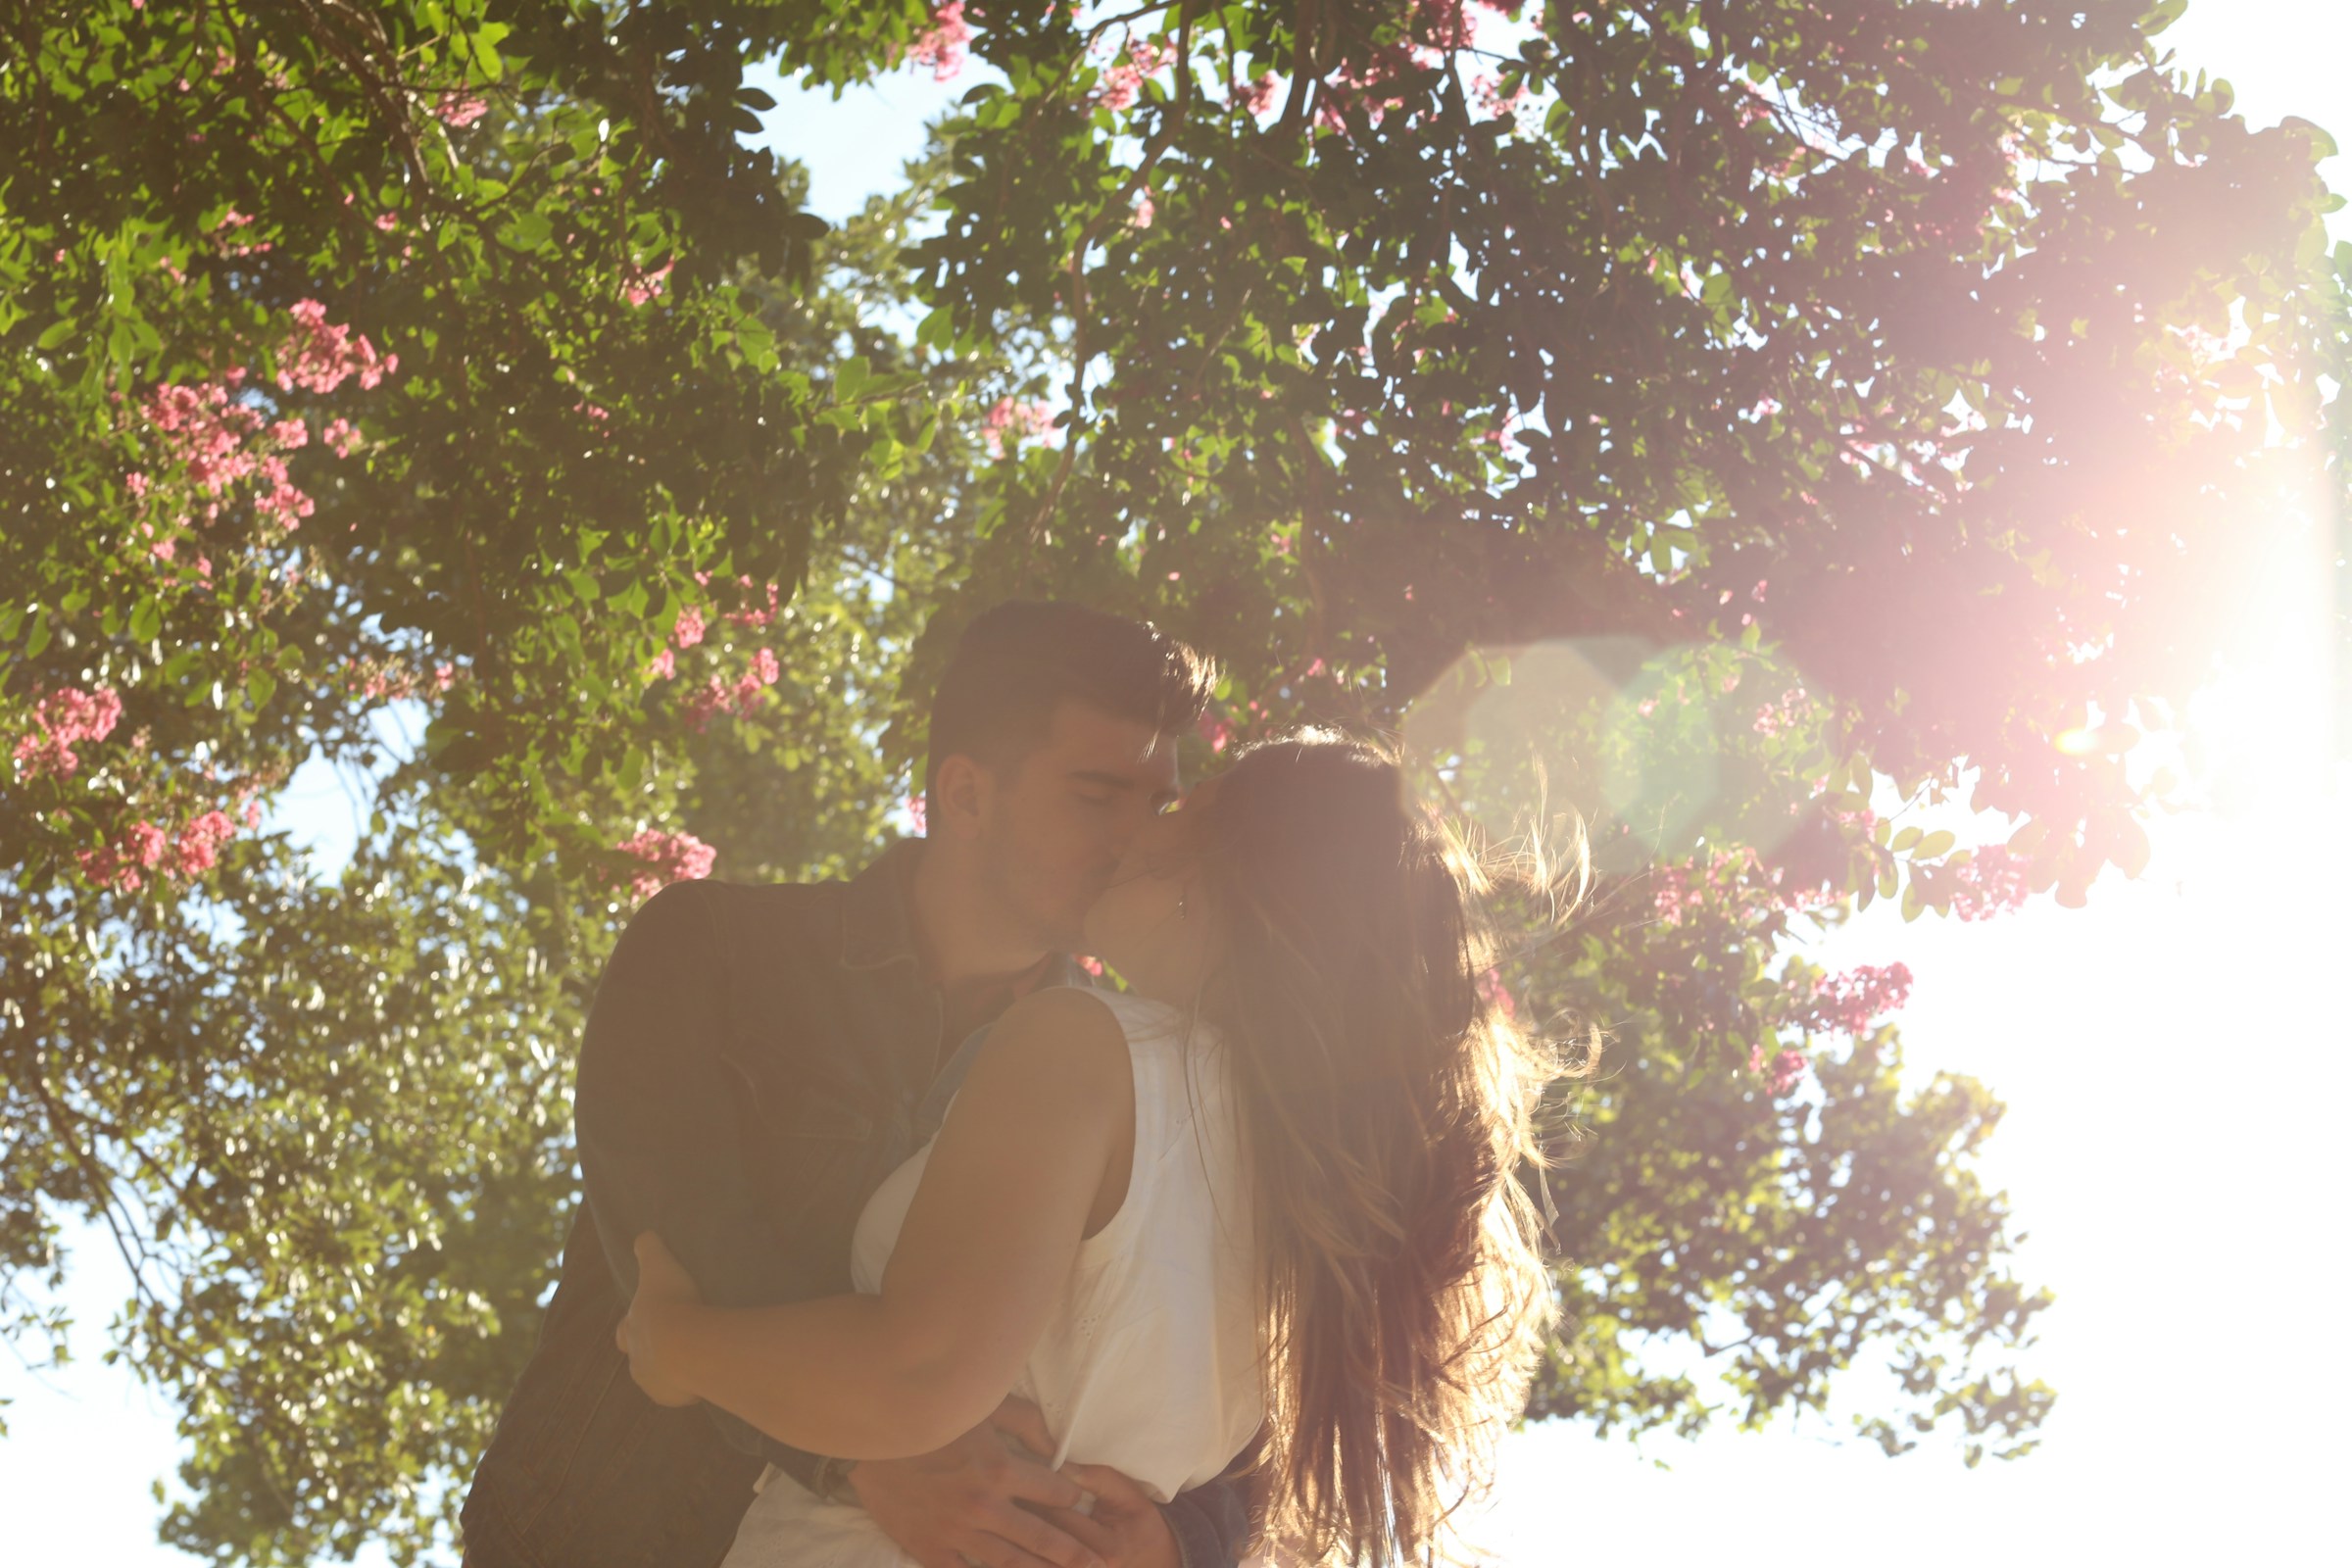 Couple kissing in nature. | Source: Unsplash